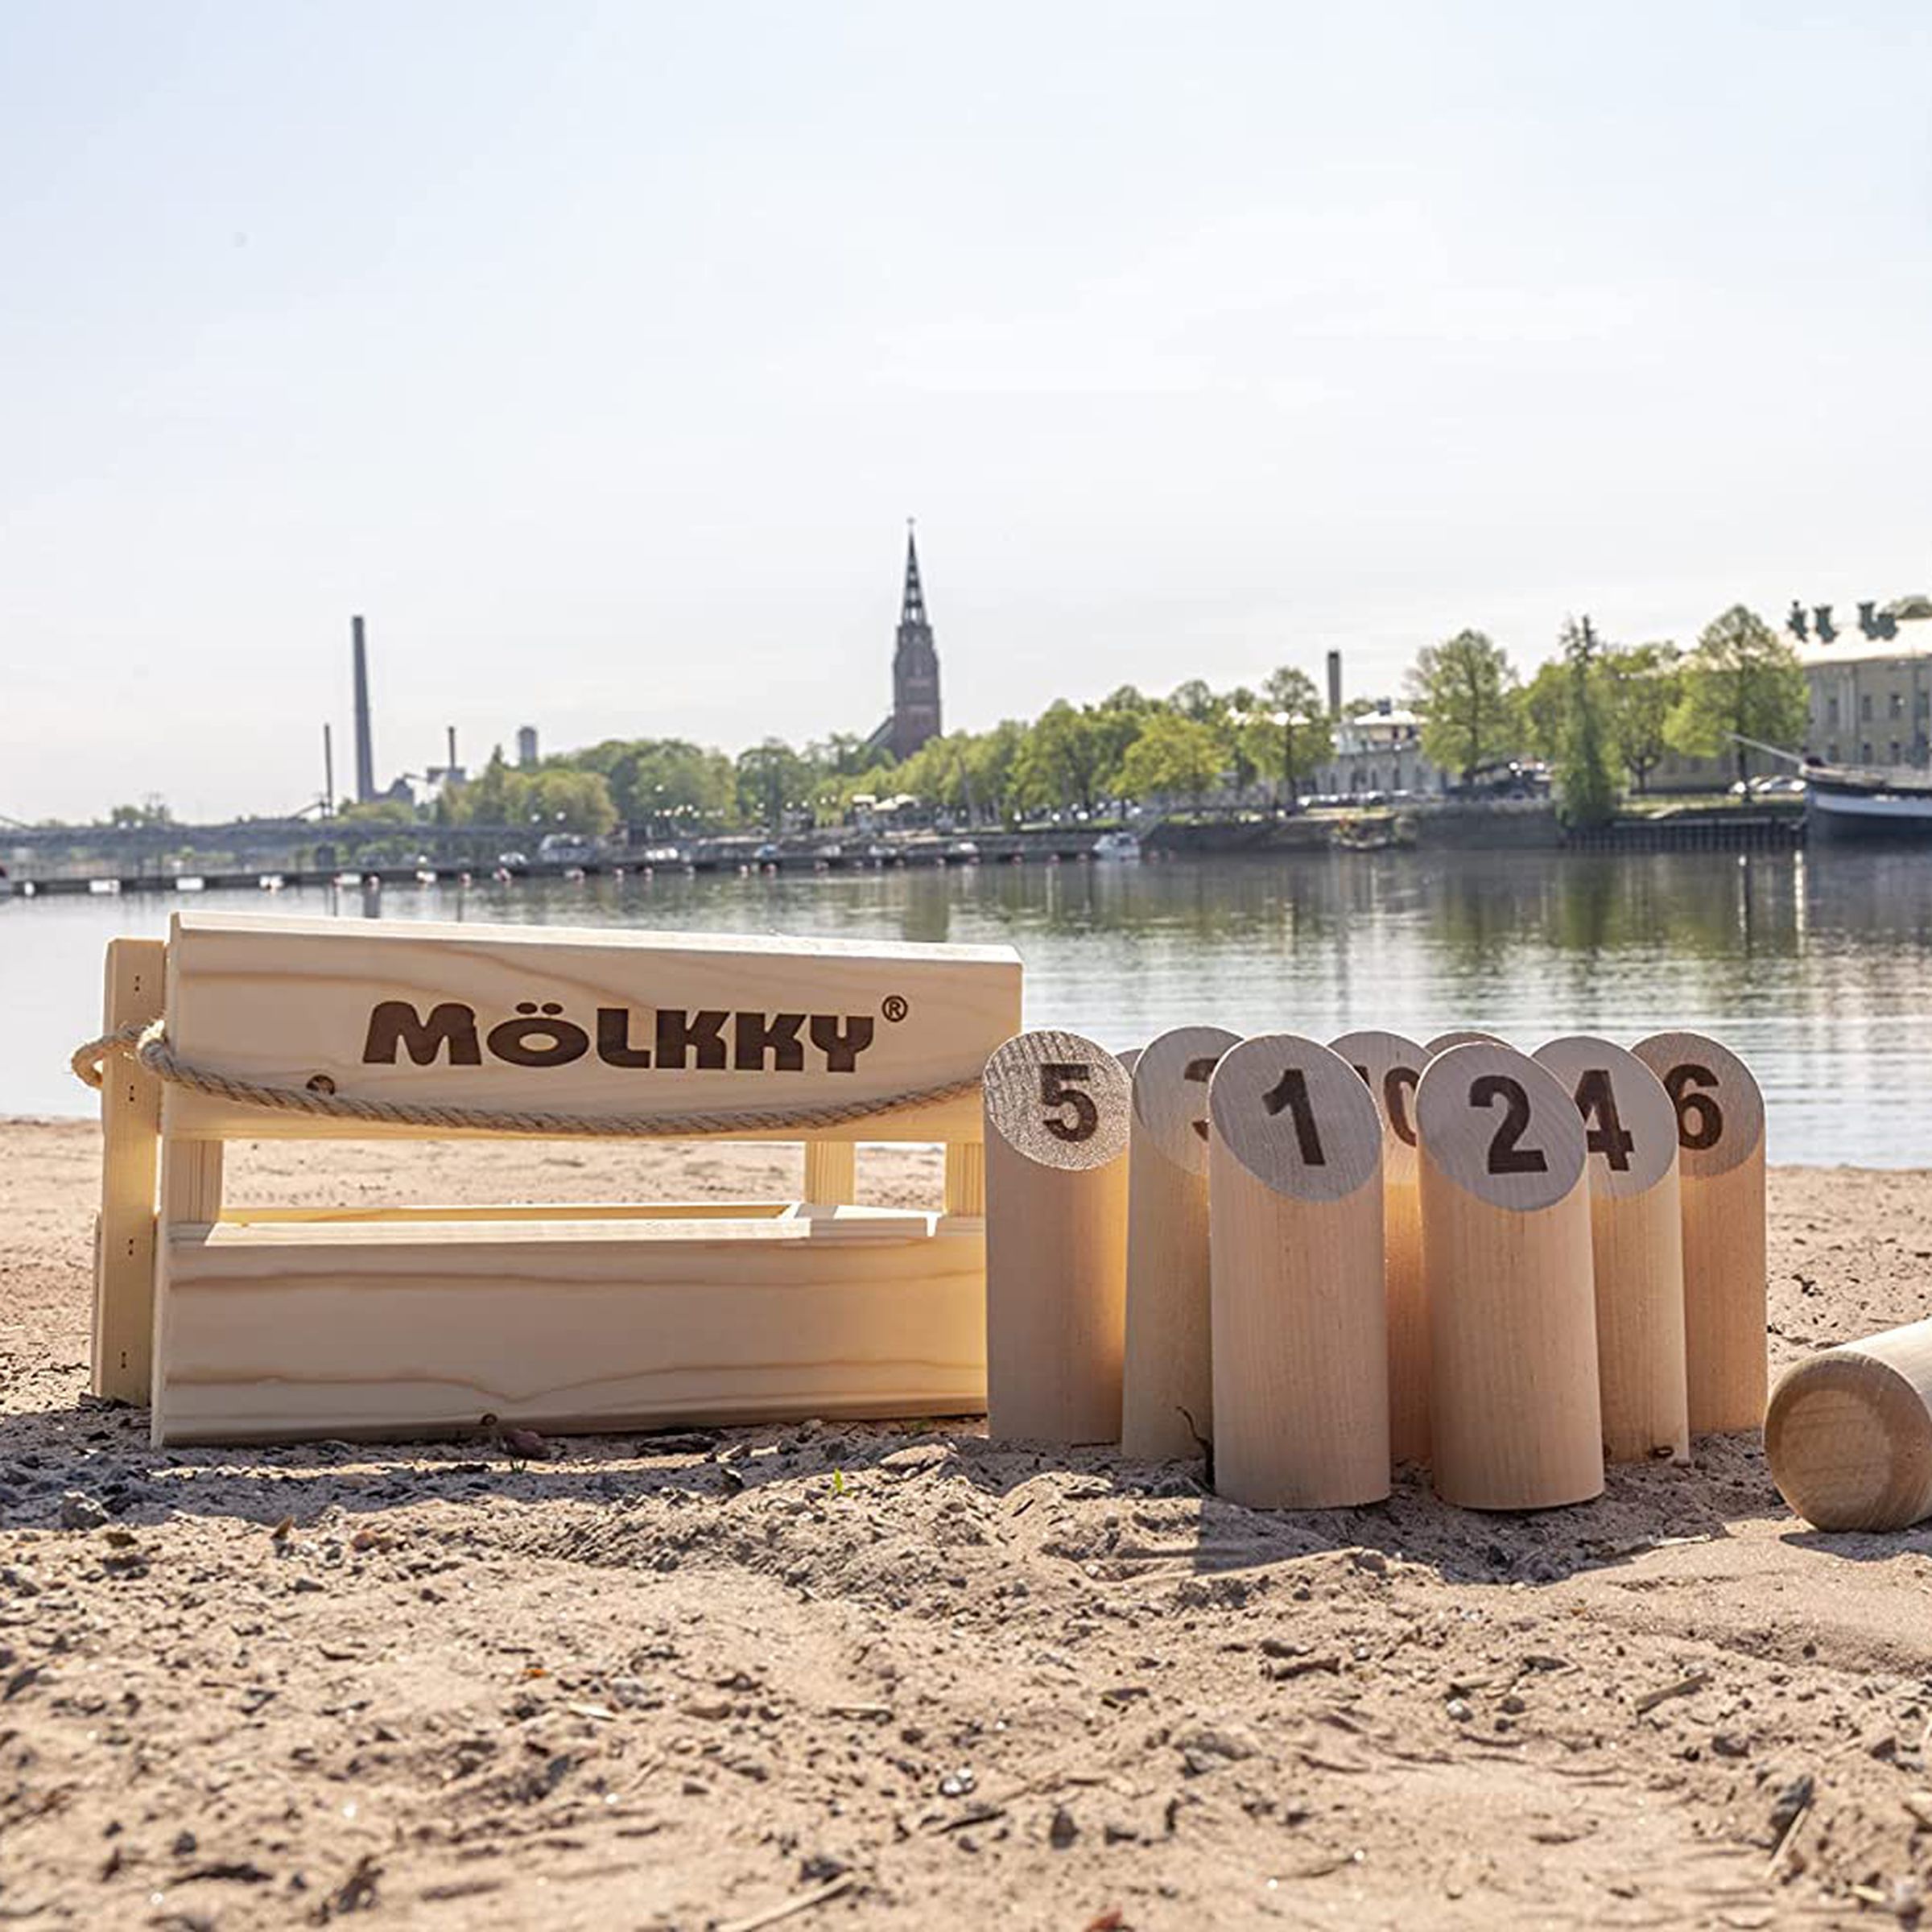 Molkky game with a wooden, several numbered pins, and a wooden dowel, on a beach with a town in the background.